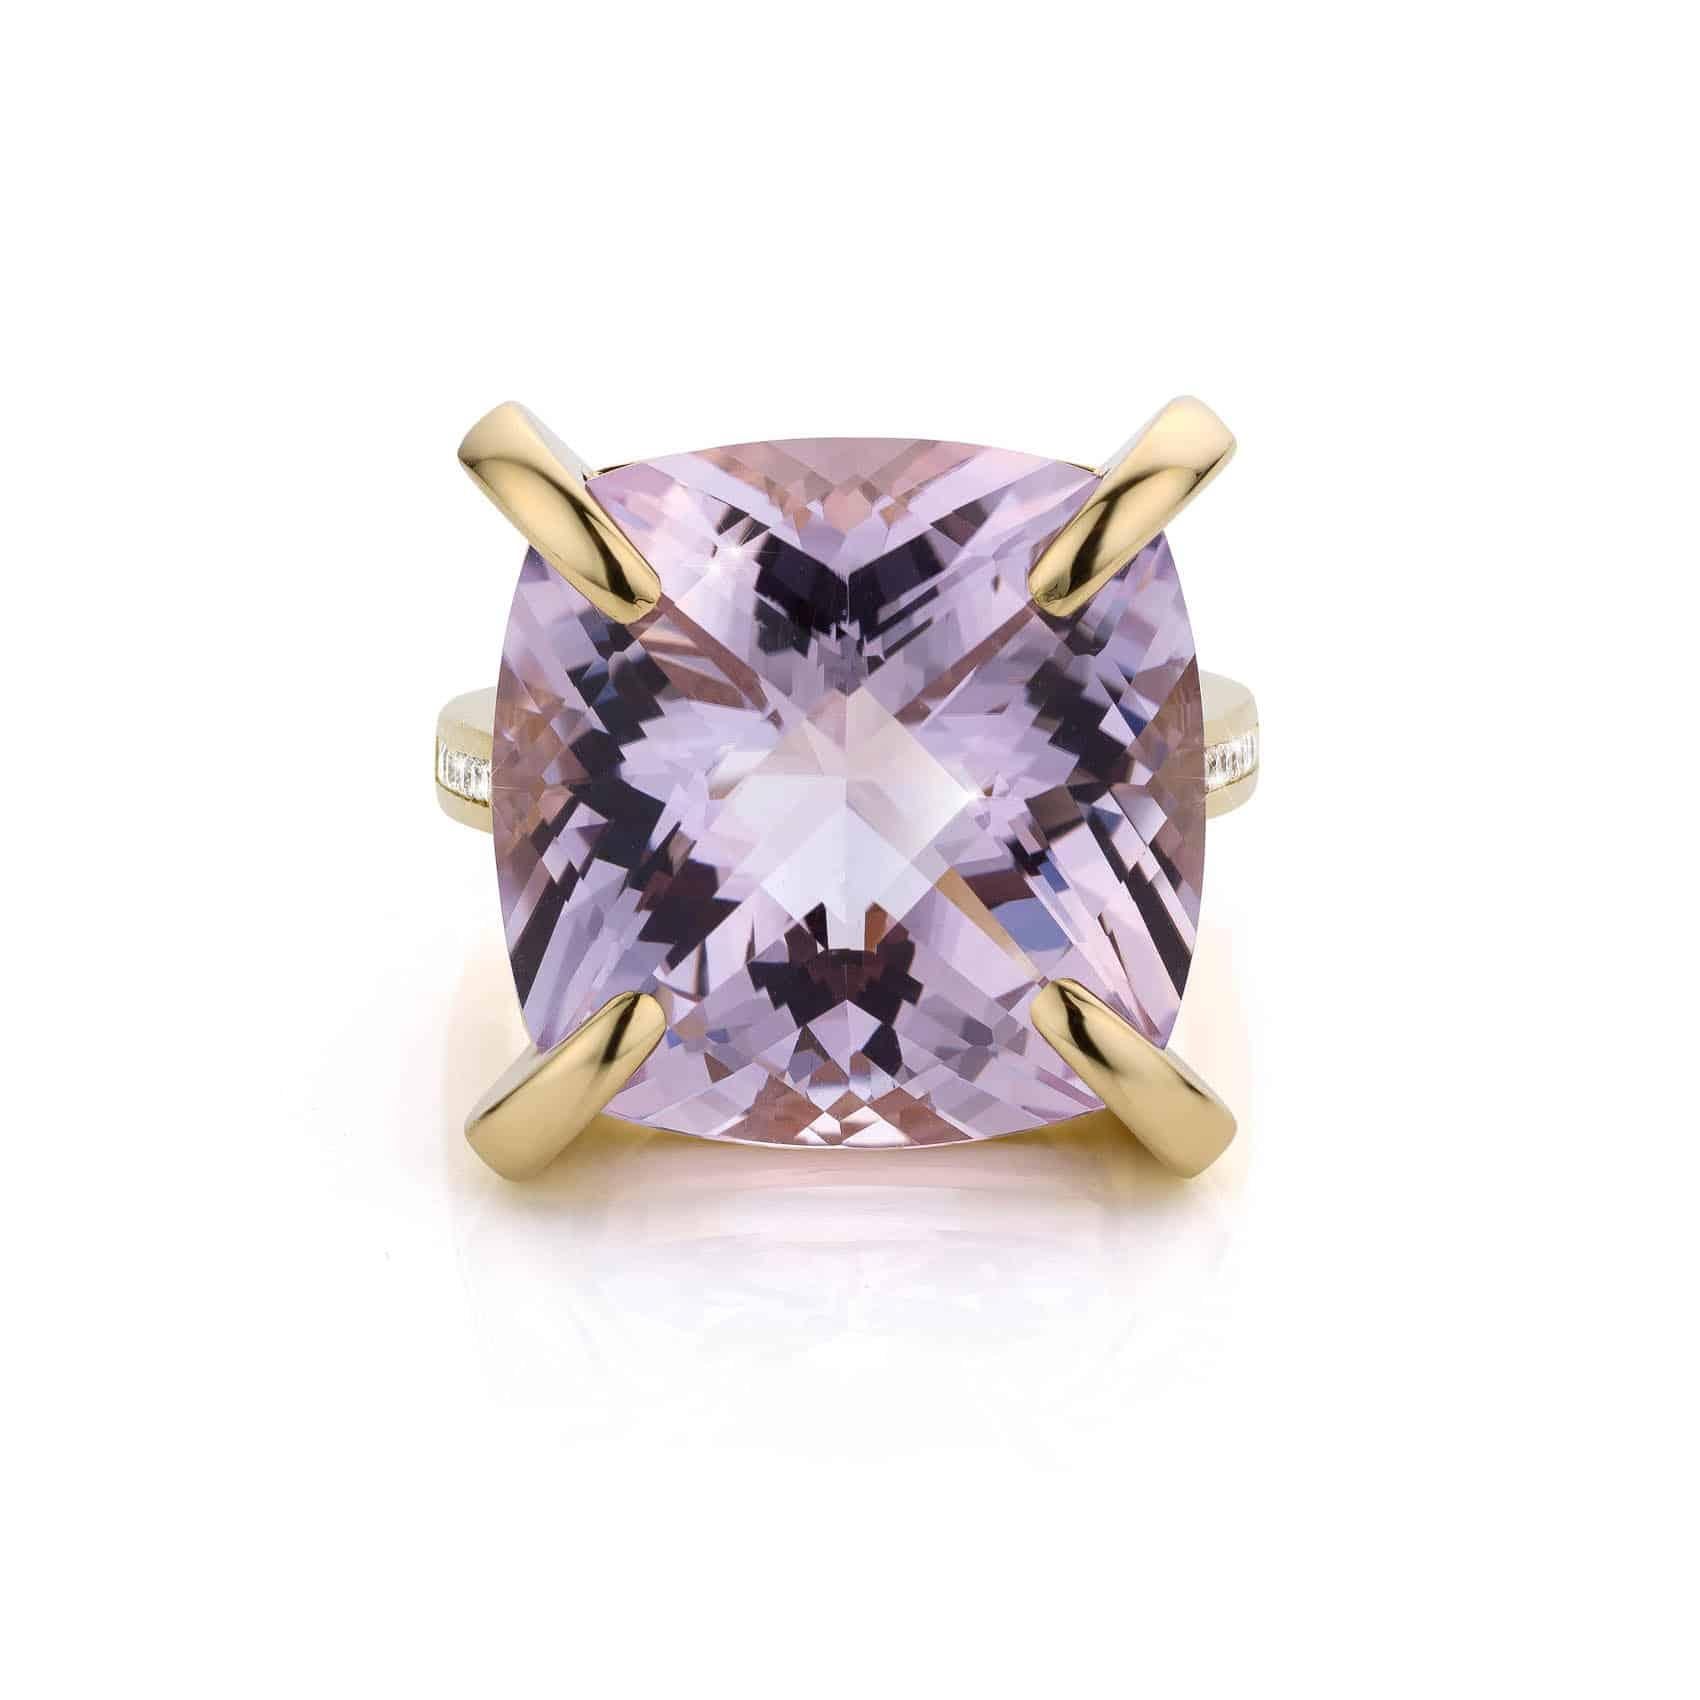 For Sale:  Cober Jewellery “Purple unique sparkling Amethist” of 13.3 Carat YellowGold Ring 2